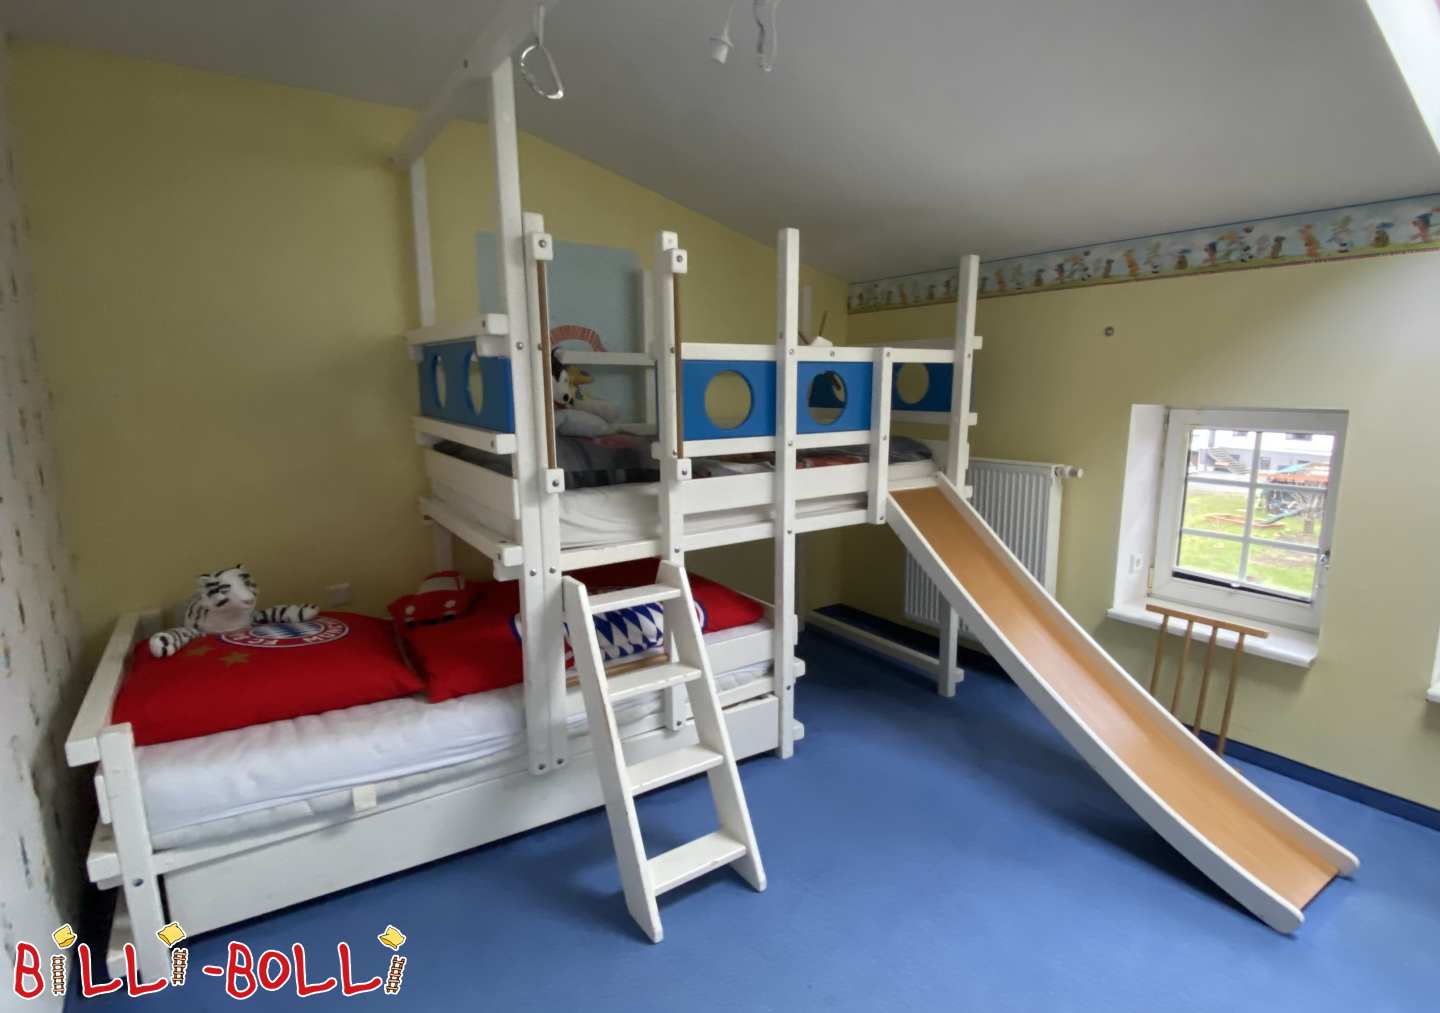 Bunk bed offset to the side + guest bed (pull-out) near Berlin (Category: Bunk Bed Laterally Staggered pre-owned)